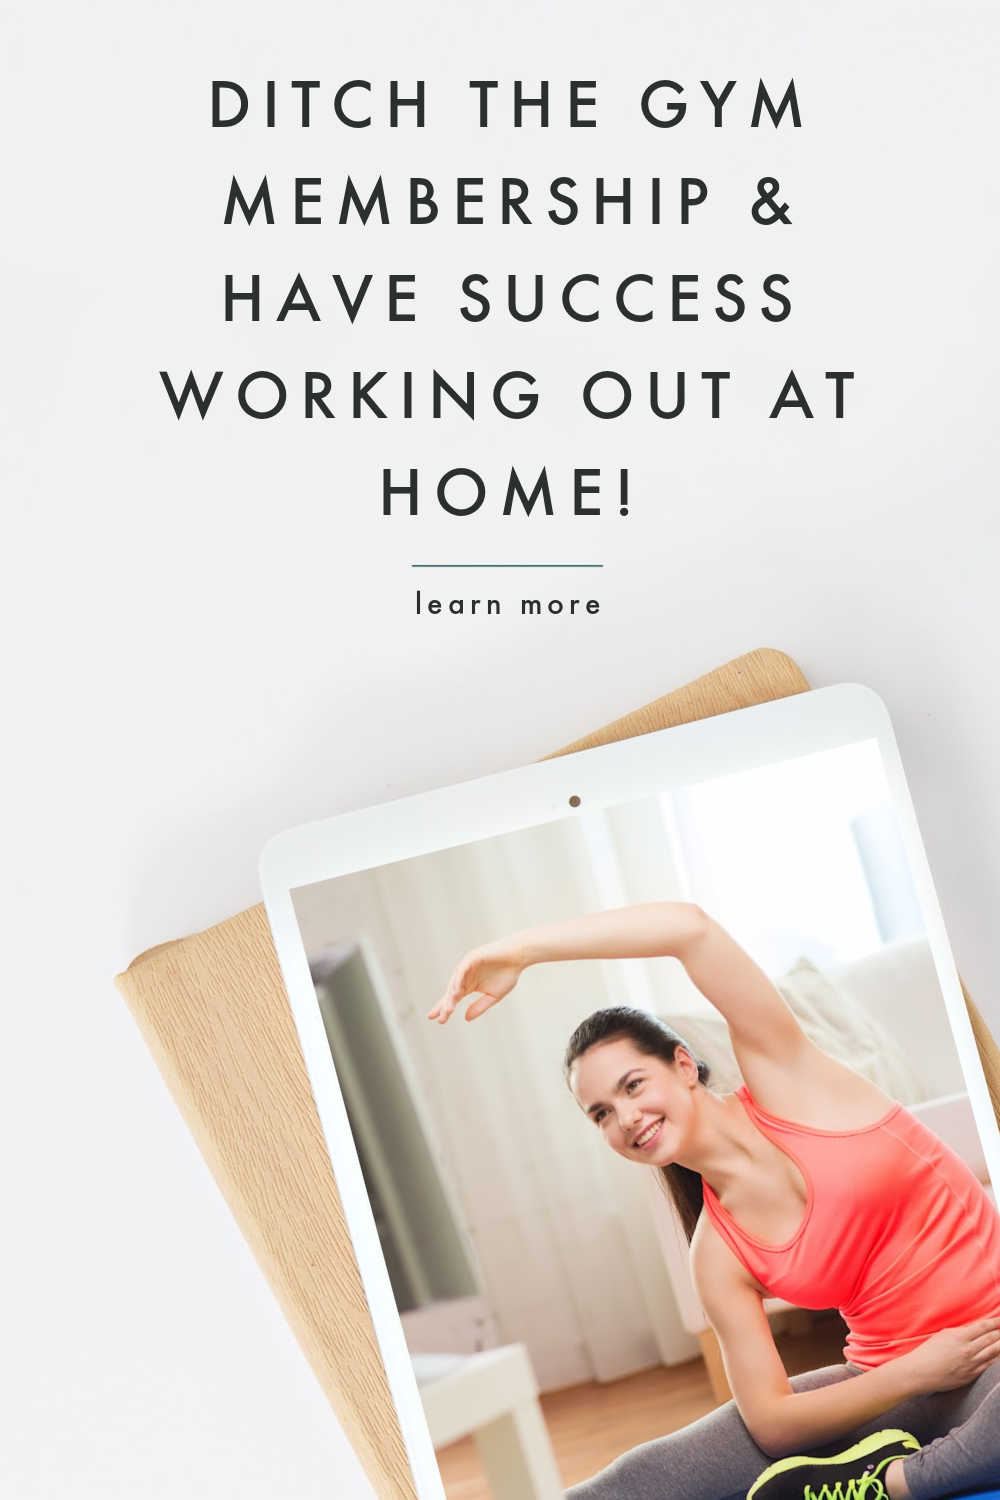 GET RID OF THE GYM MEMBERSHIP AND WORK OUT AT HOME